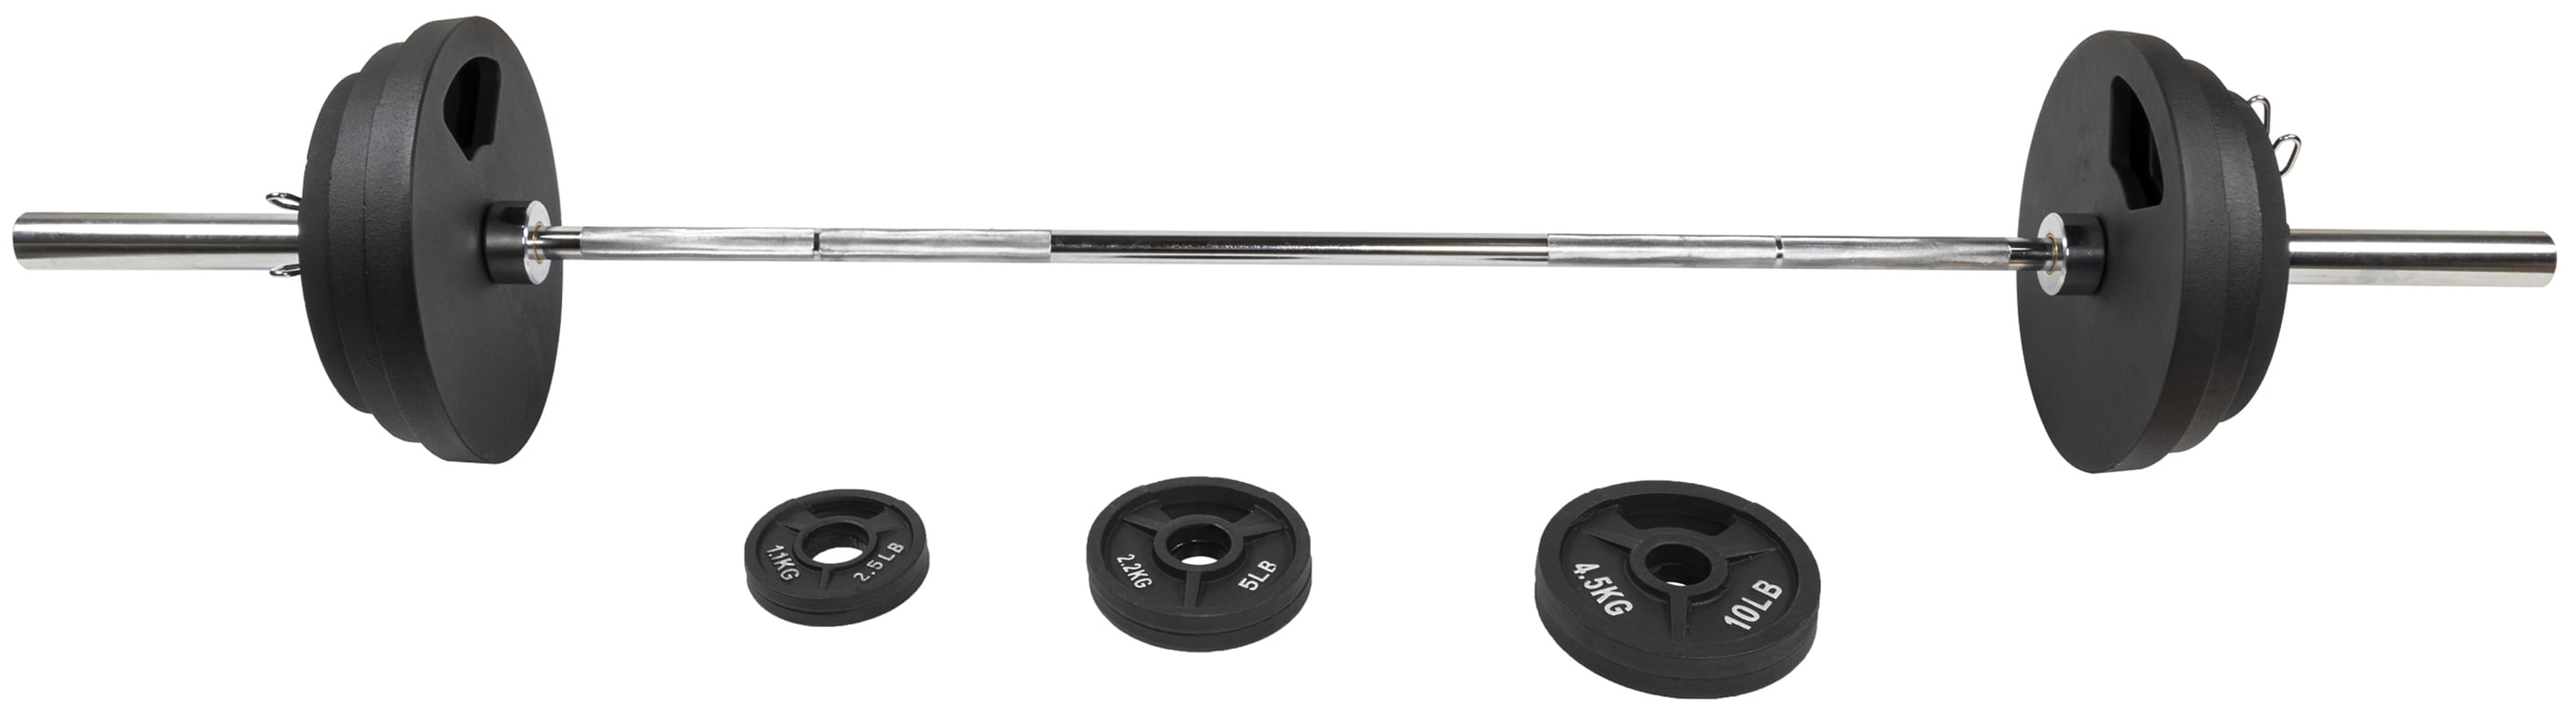 BalanceFrom Cast Iron Olympic Weight Including 7FT Olympic Barbell and Clips, 300-Pound Set (255 Pounds Plates + 45 Pounds Barbell), Multiple Packages